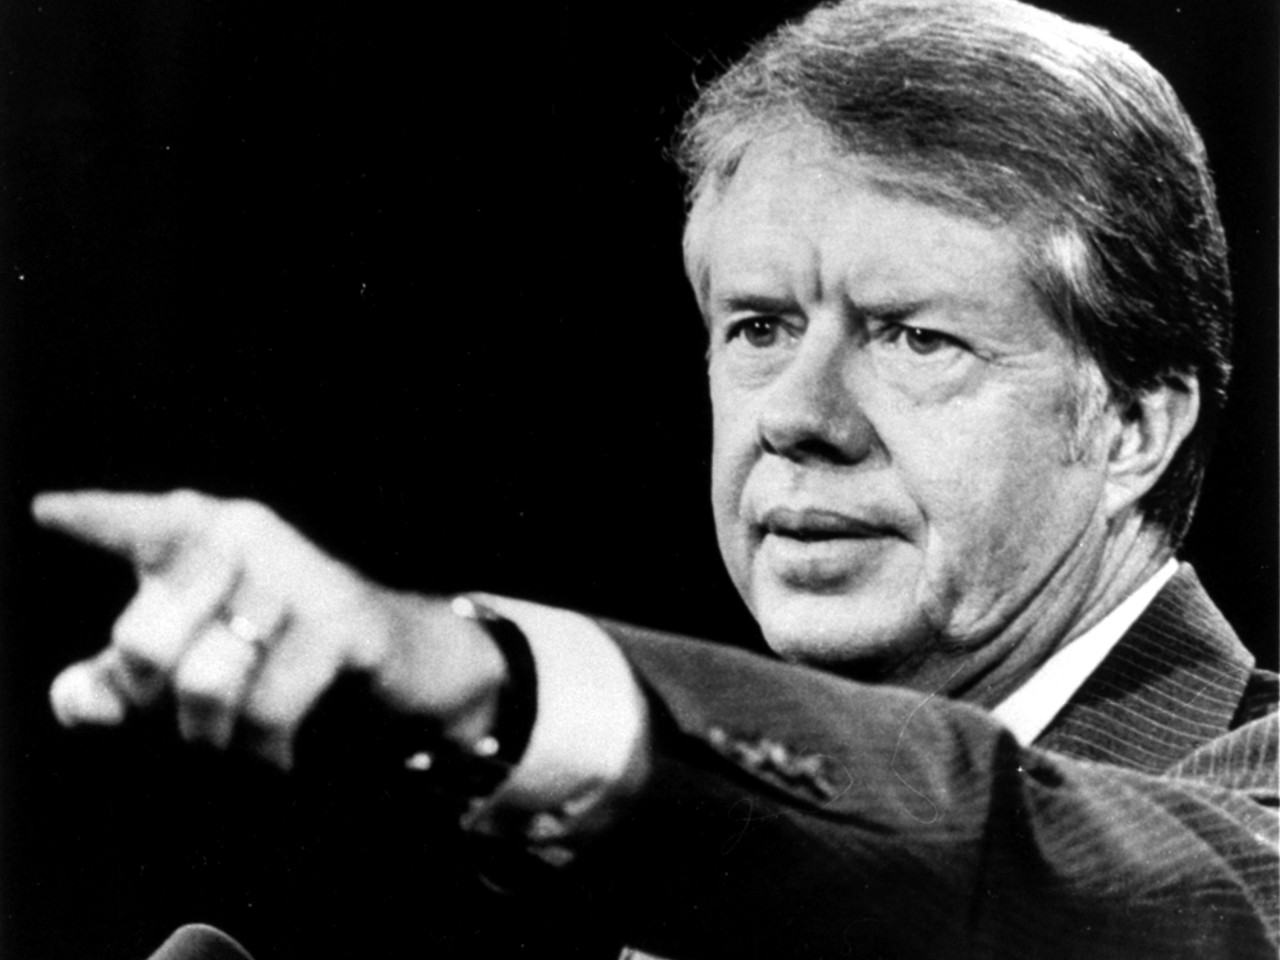 Jimmy Carter (filing jointly)